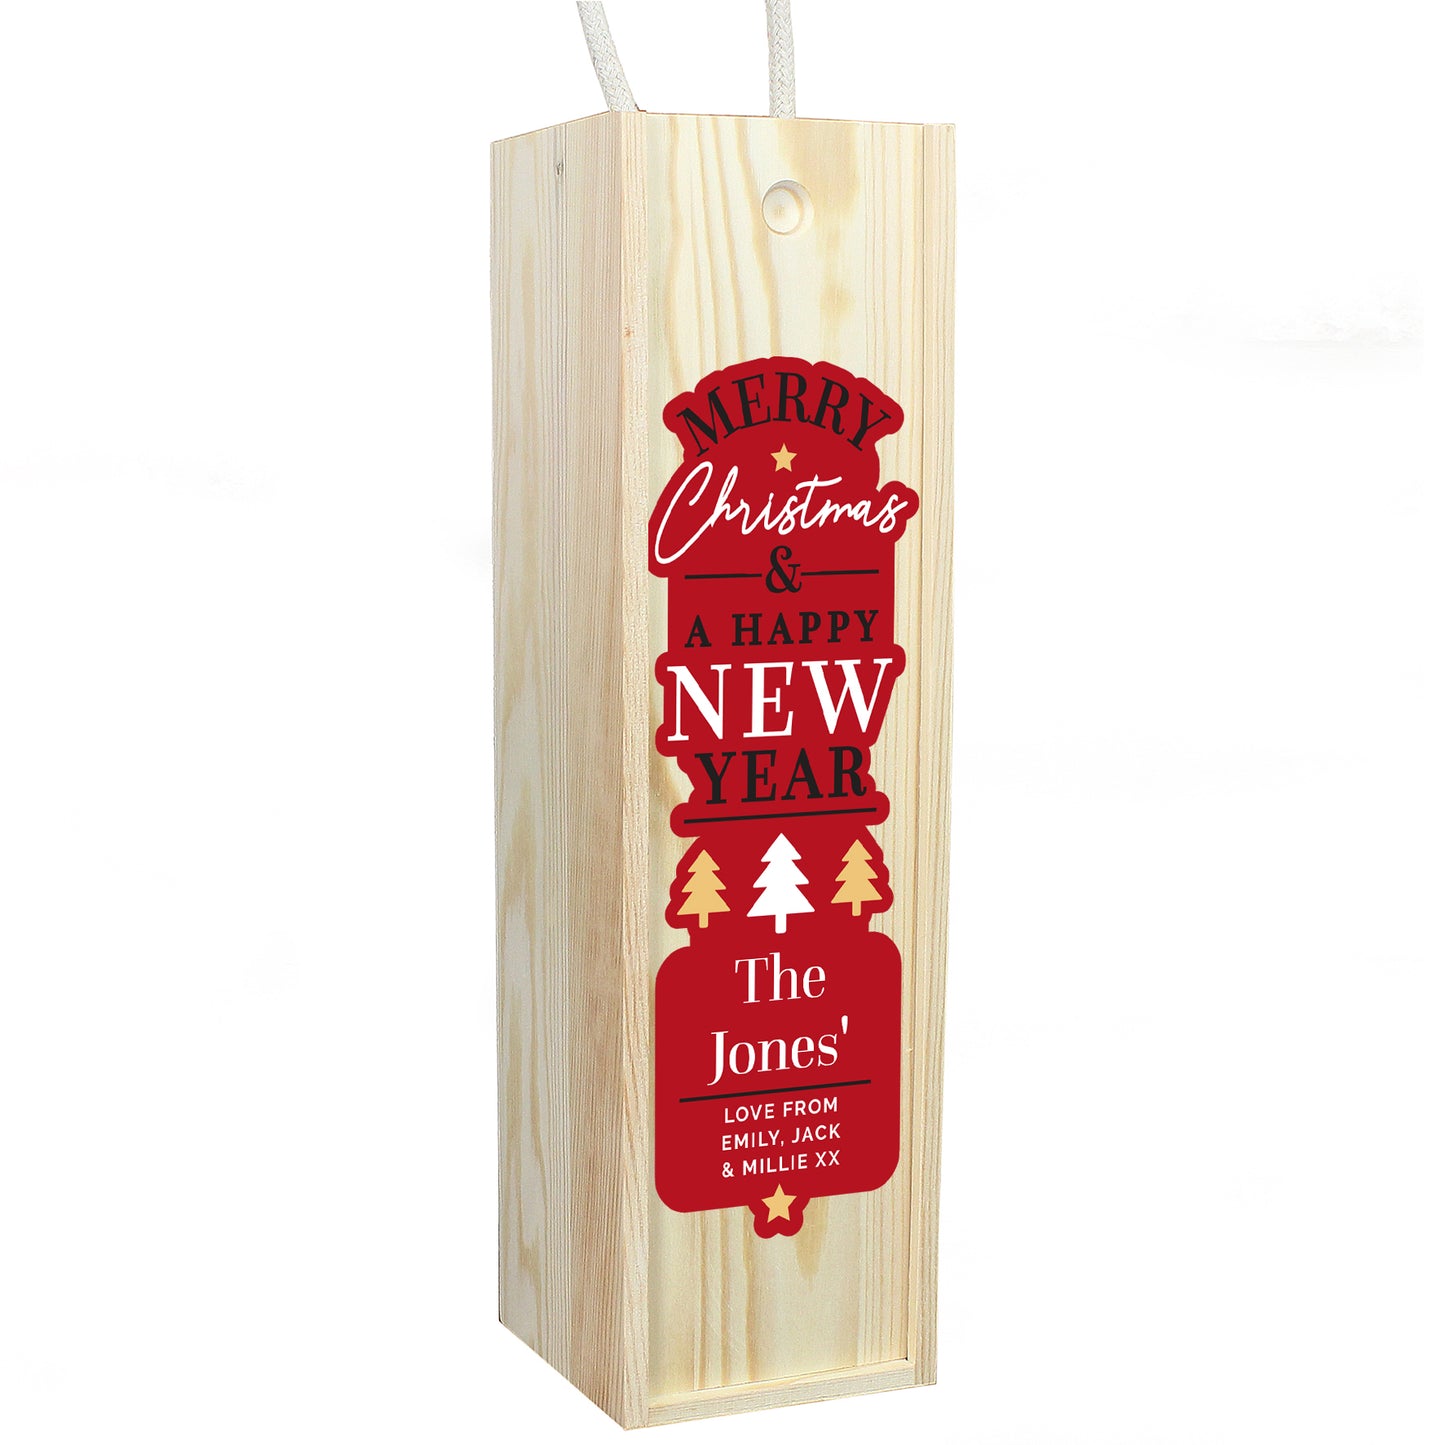 Personalised Merry Christmas & A Happy New Year Wooden Wine Bottle Box - Personalise It!